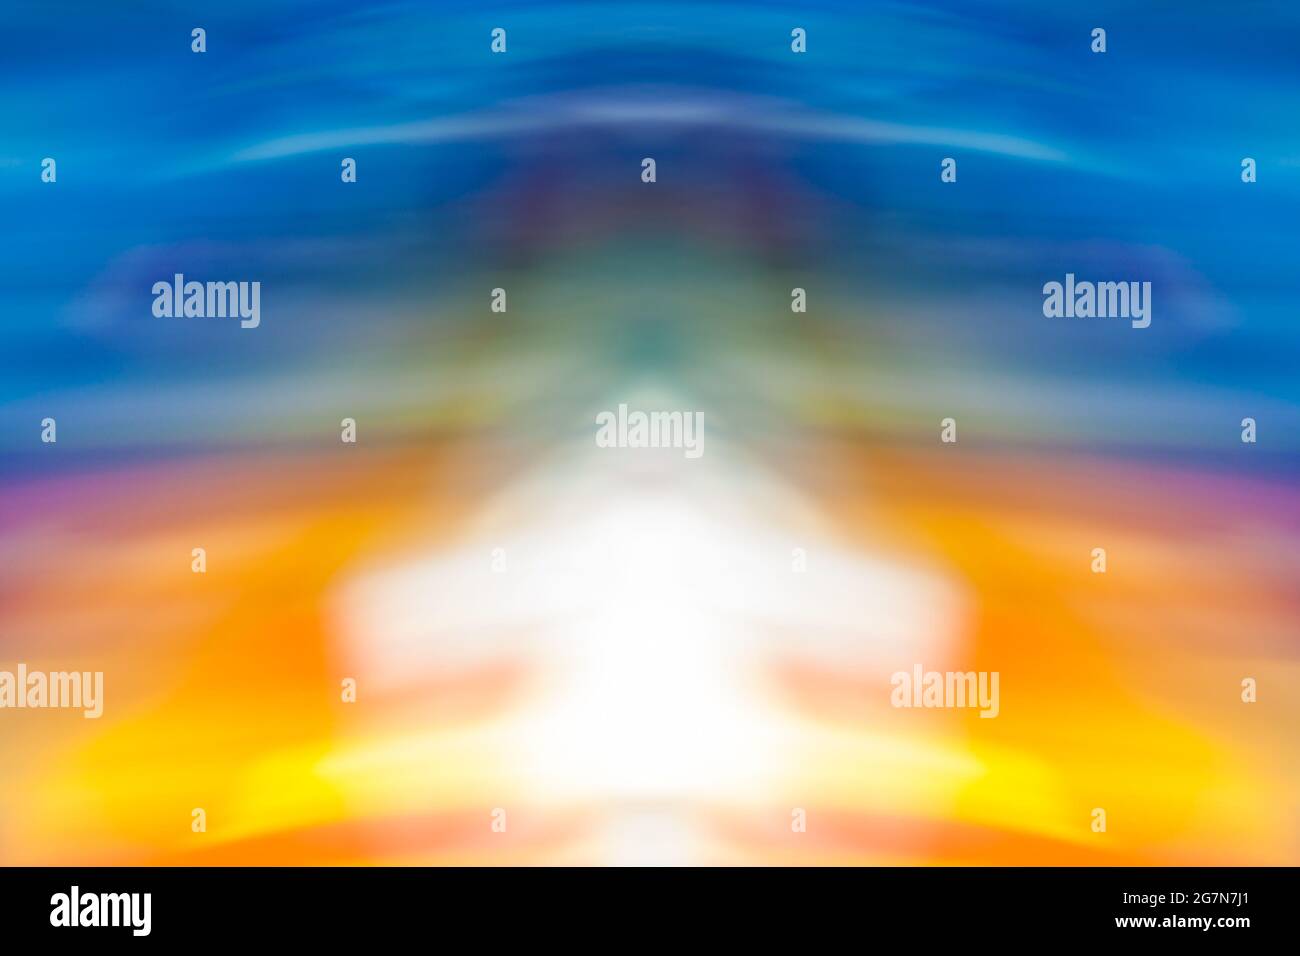 Colorful abstract light vivid color blurred background for use in your design. Creative graphic design. Stock Photo